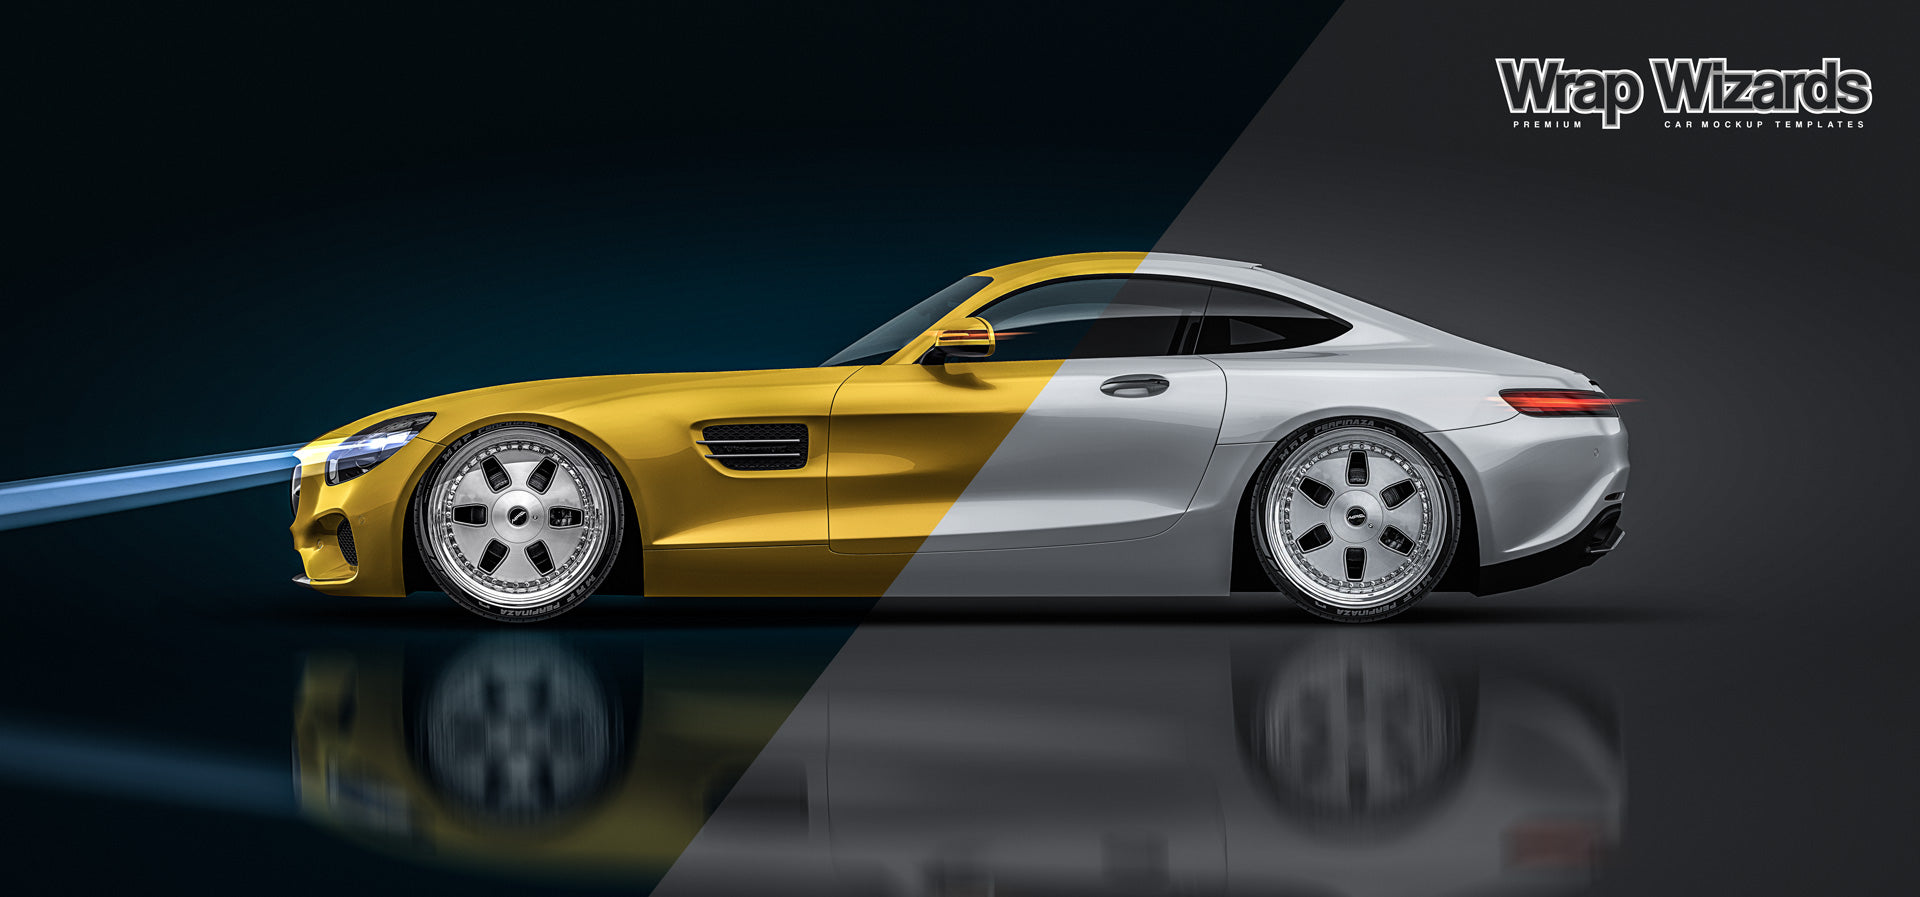 Mercedes-Benz AMG GT 2016 glossy finish - all sides Car Mockup Template.psd